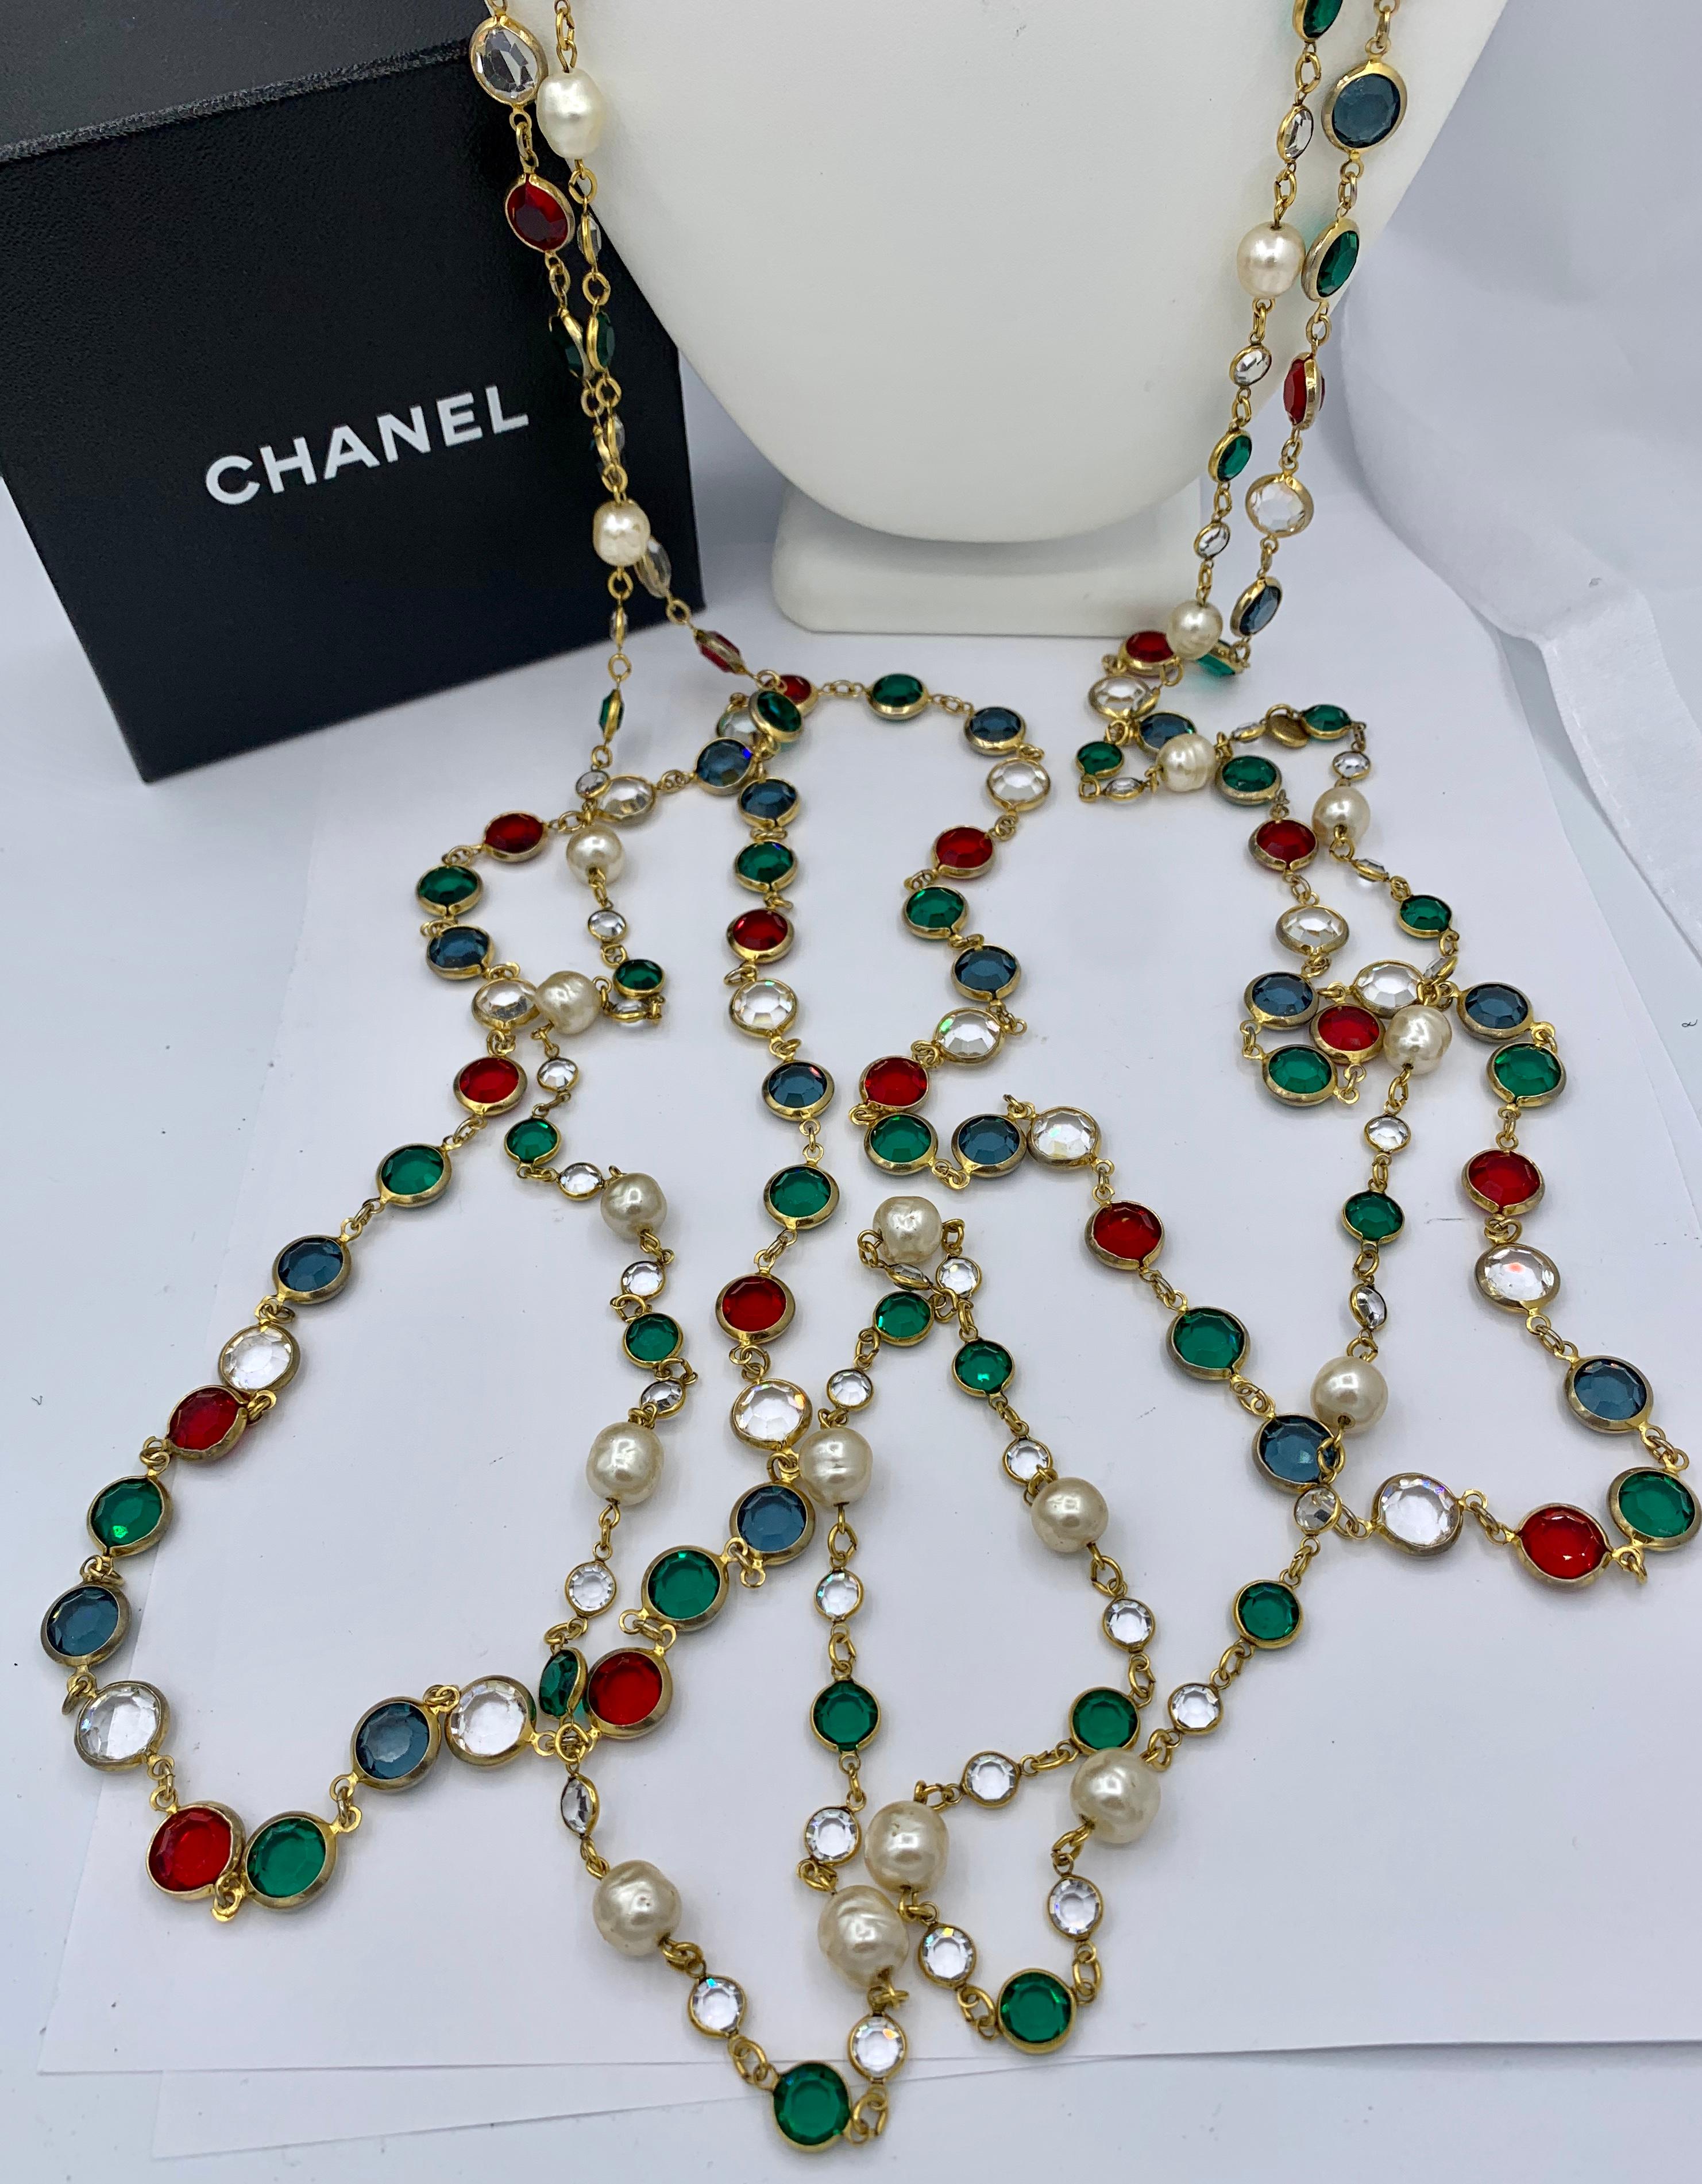 Two Chanel Gripoix Necklaces 1981 Signed Estate of Barbara Taylor Bradford For Sale 3